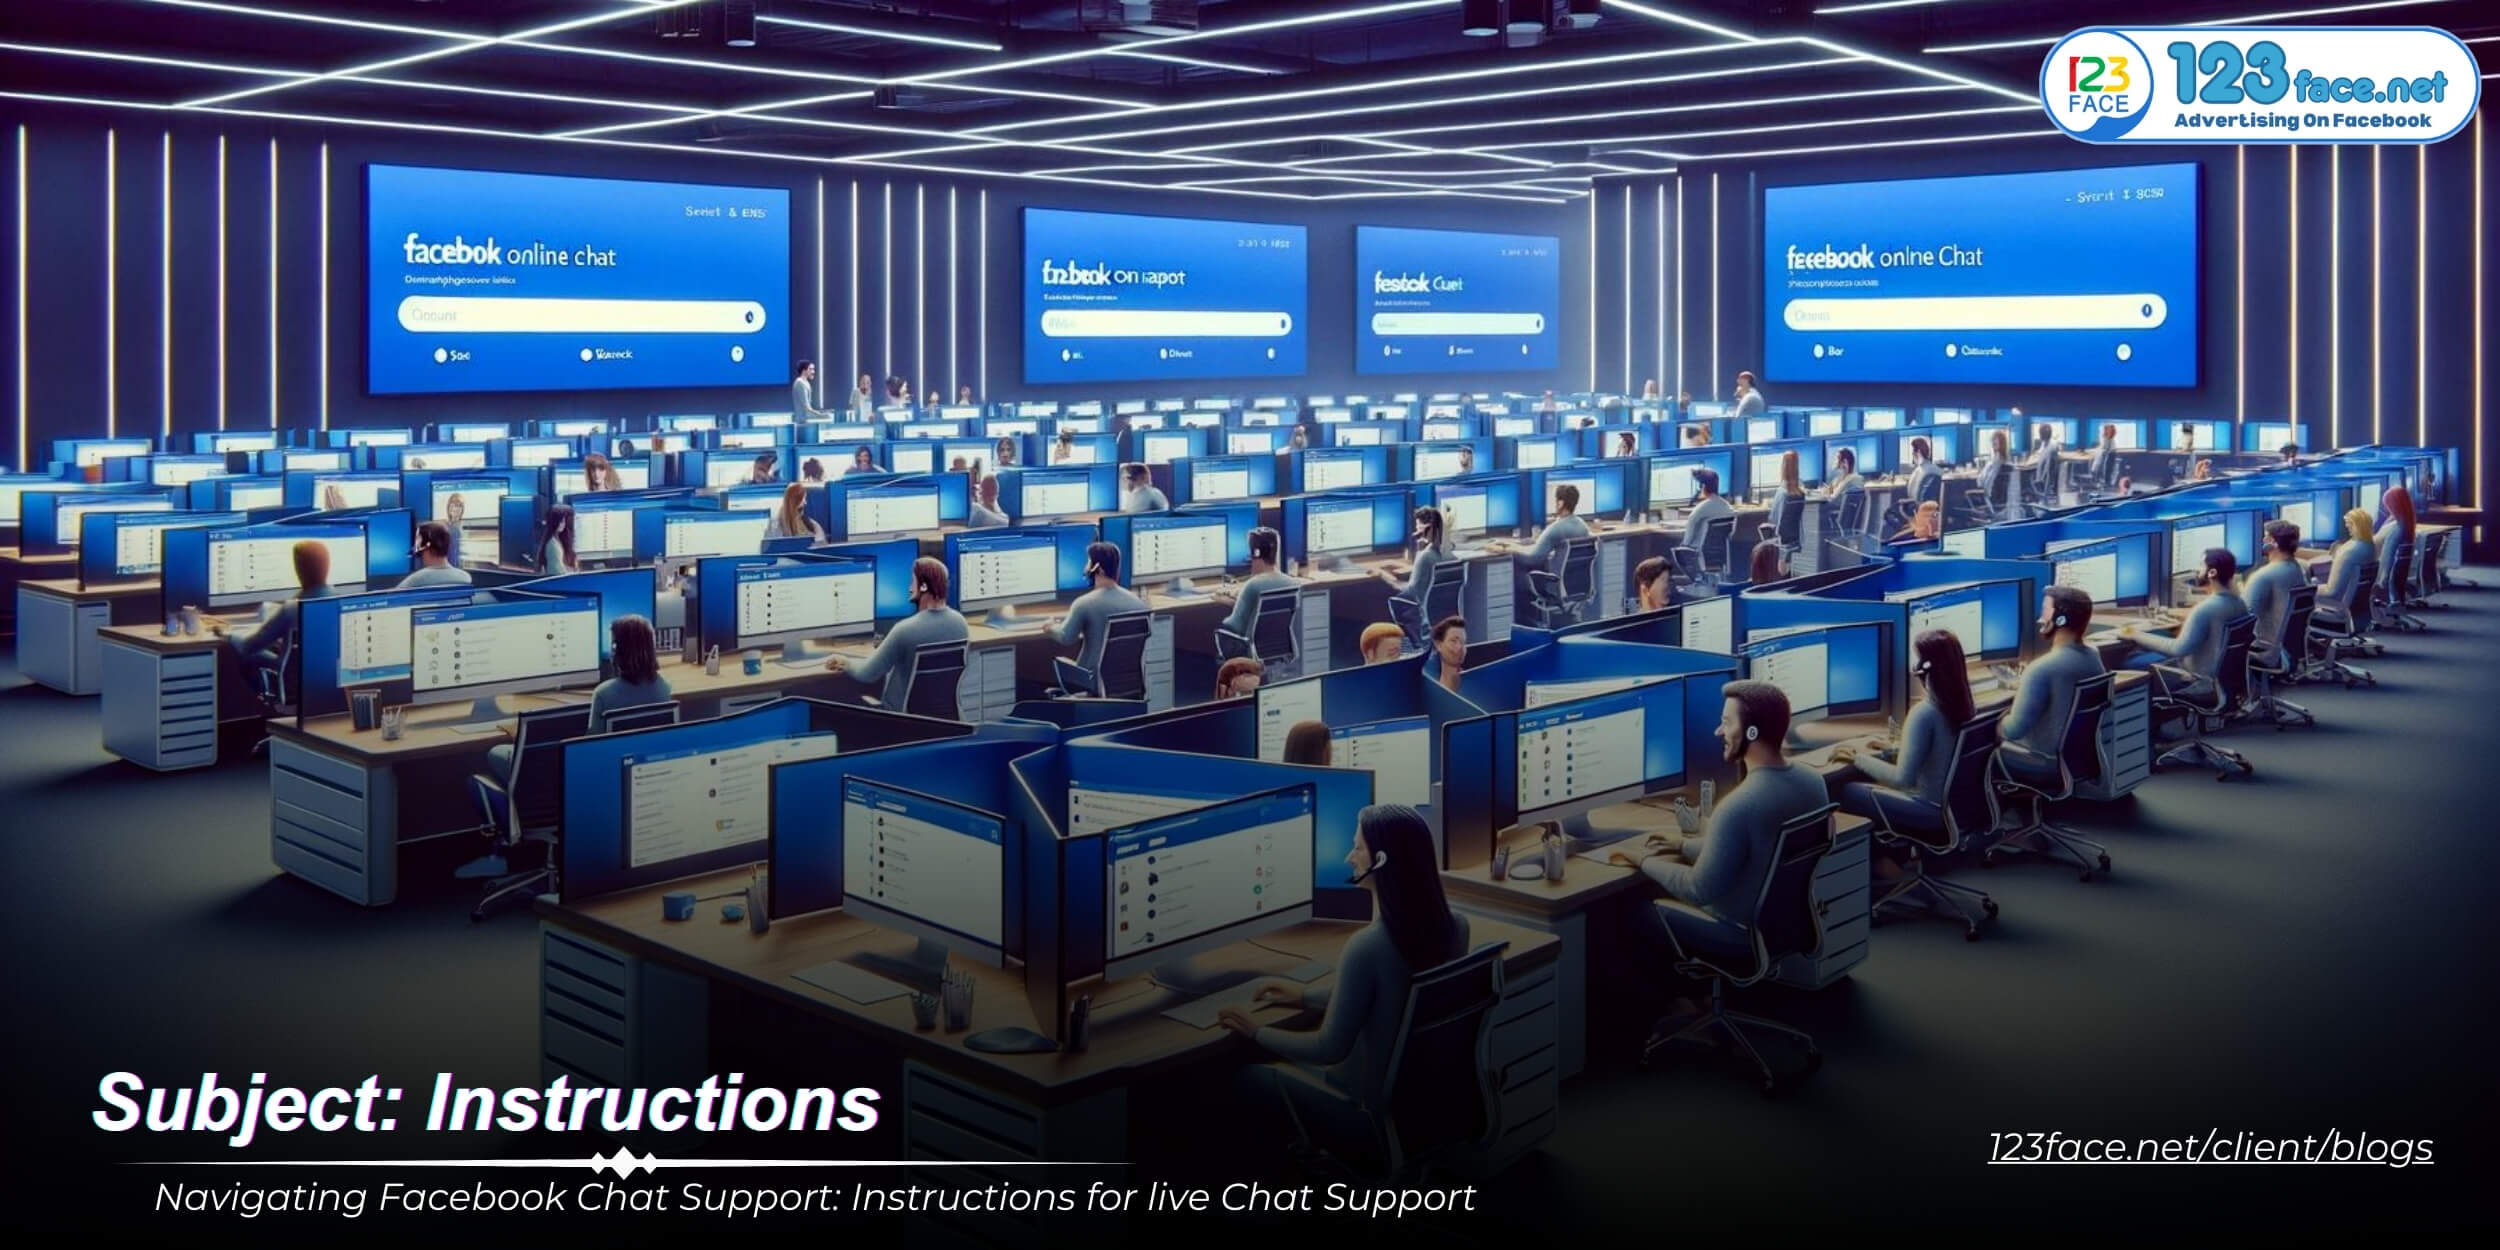 Navigating Facebook Chat Support: Instructions for live Chat Support